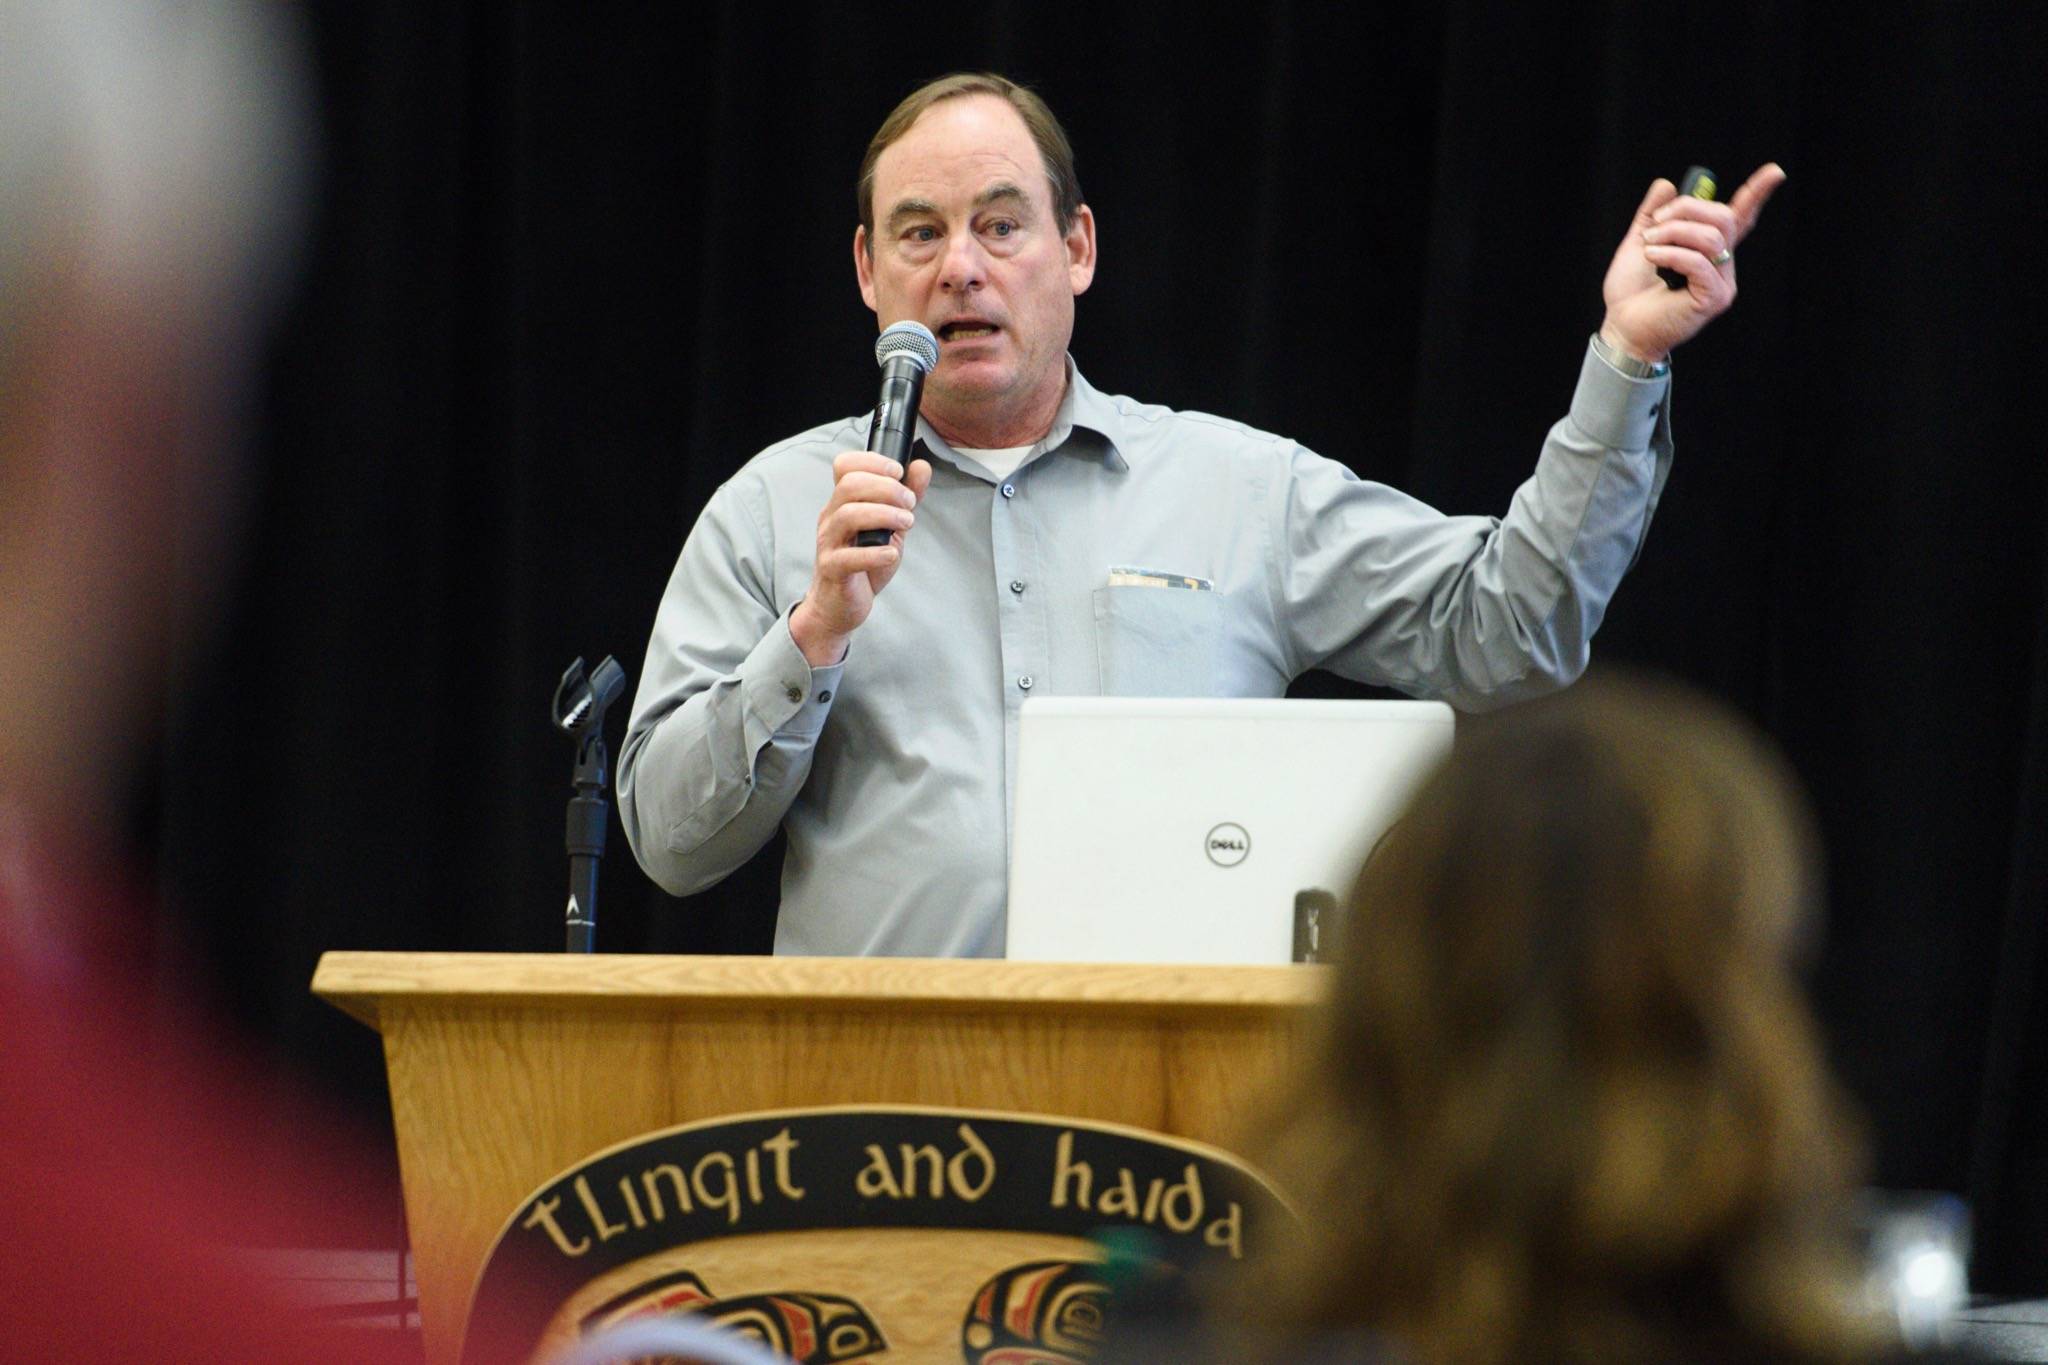 U.S. Forest Service Juneau District Ranger Brad Orr speaks to the Juneau Chamber of Commerce during its weekly luncheon at the Elizabeth Peratrovich Hall on Thursday, June 27, 2019. (Michael Penn | Juneau Empire)